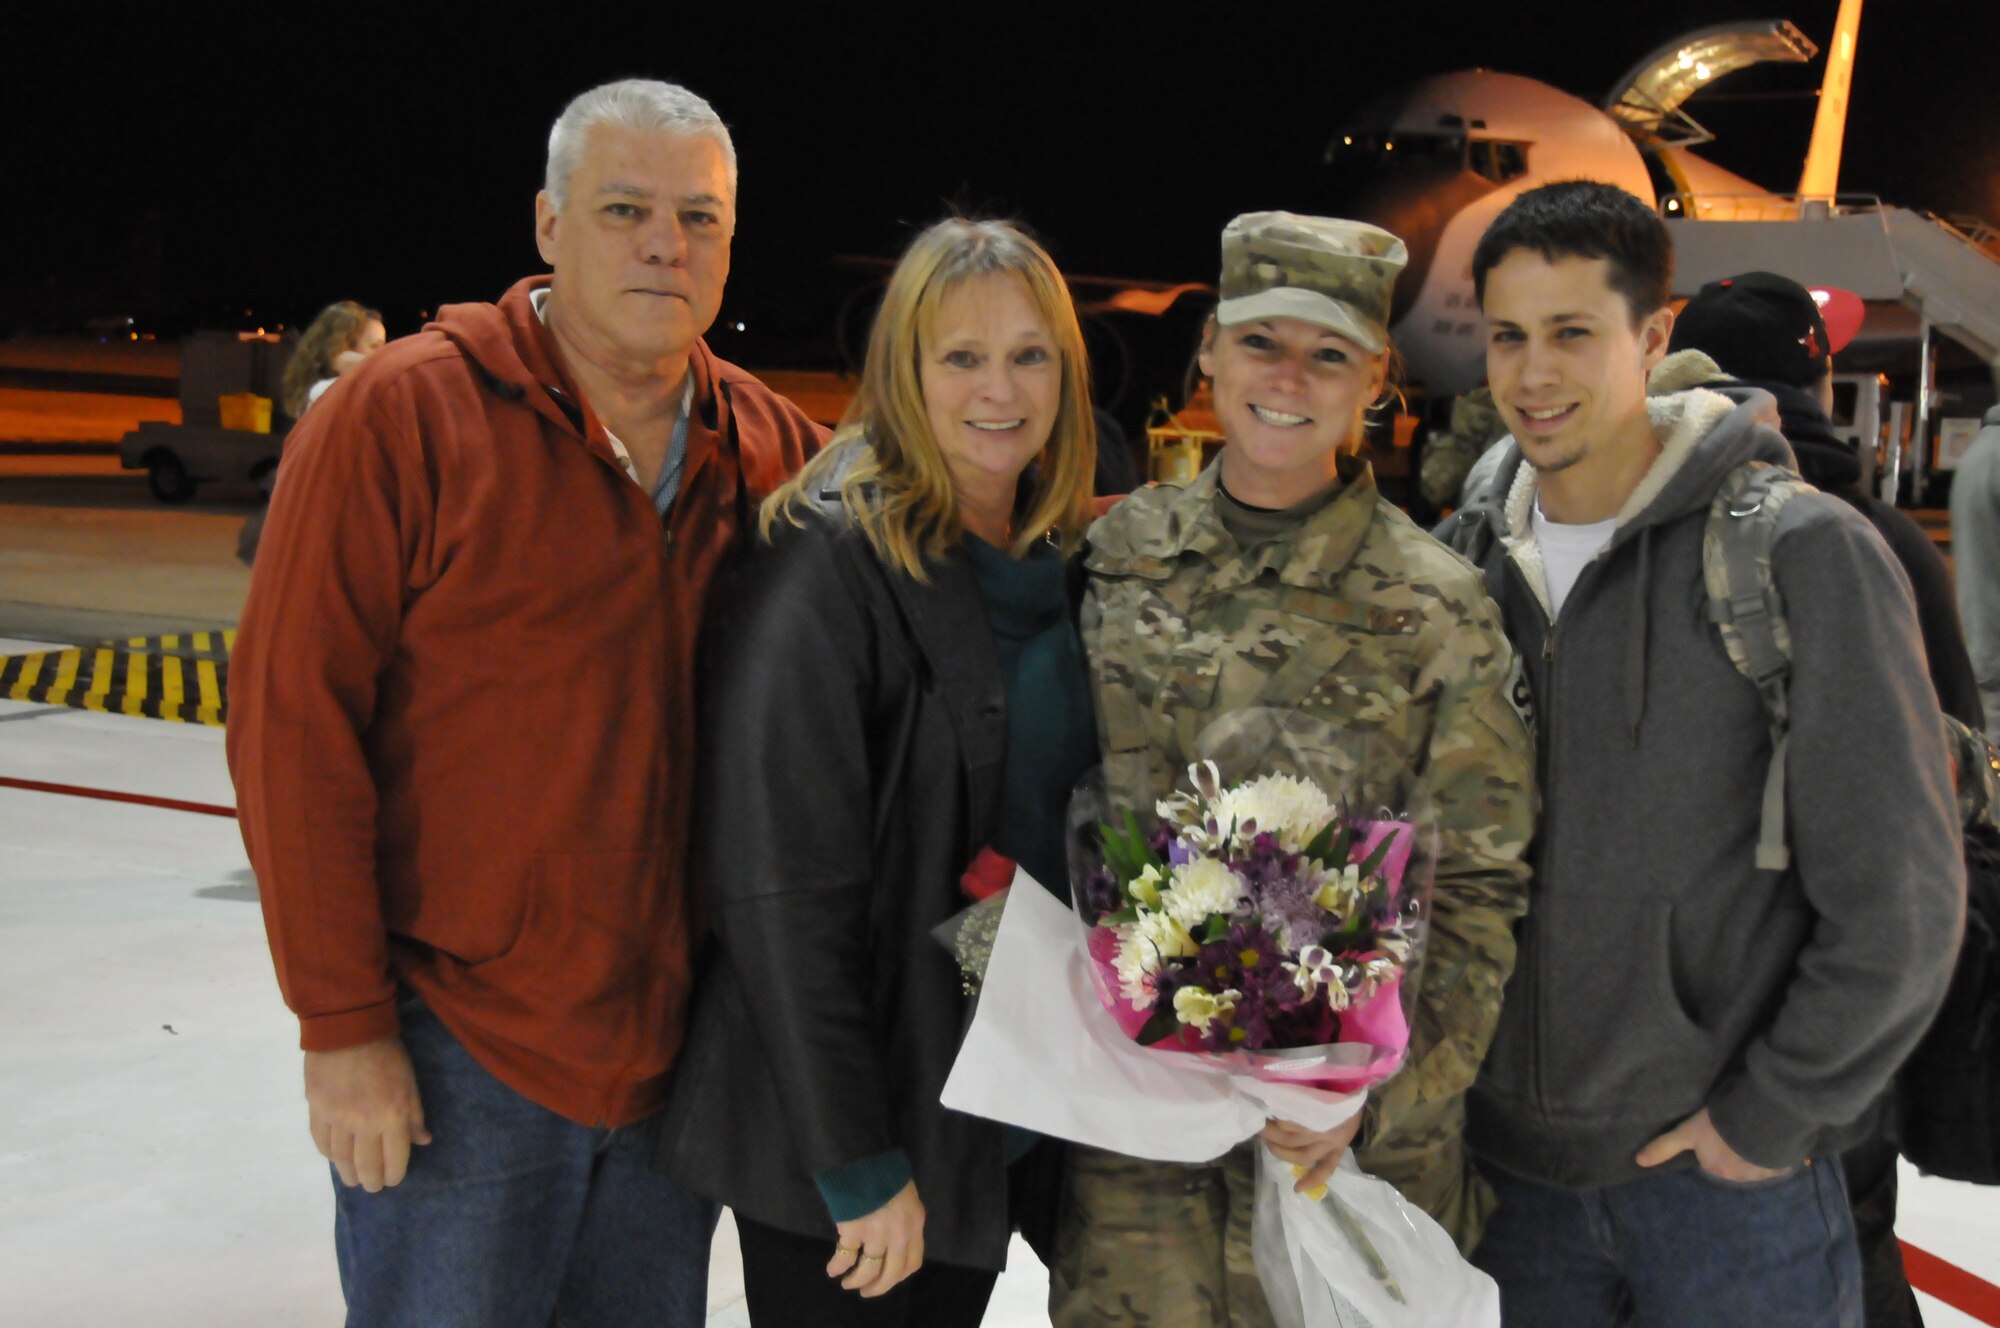 Staff Sgt. Michelle Wilson, 126th Security Forces Squadron security team
member, poses with her family and fiancé after returning from a six month
deployment to Afghanistan in support of Operation Enduring Freedom. The
Illinois Air National Guard unit, located at Scott AFB, Ill., has deployed
many personnel in support of both Operation Iraqi Freedom and Operation
Enduring Freedom since September 11, 2001. (US Air Force photo by Master
Sgt. Ken Stephens)
